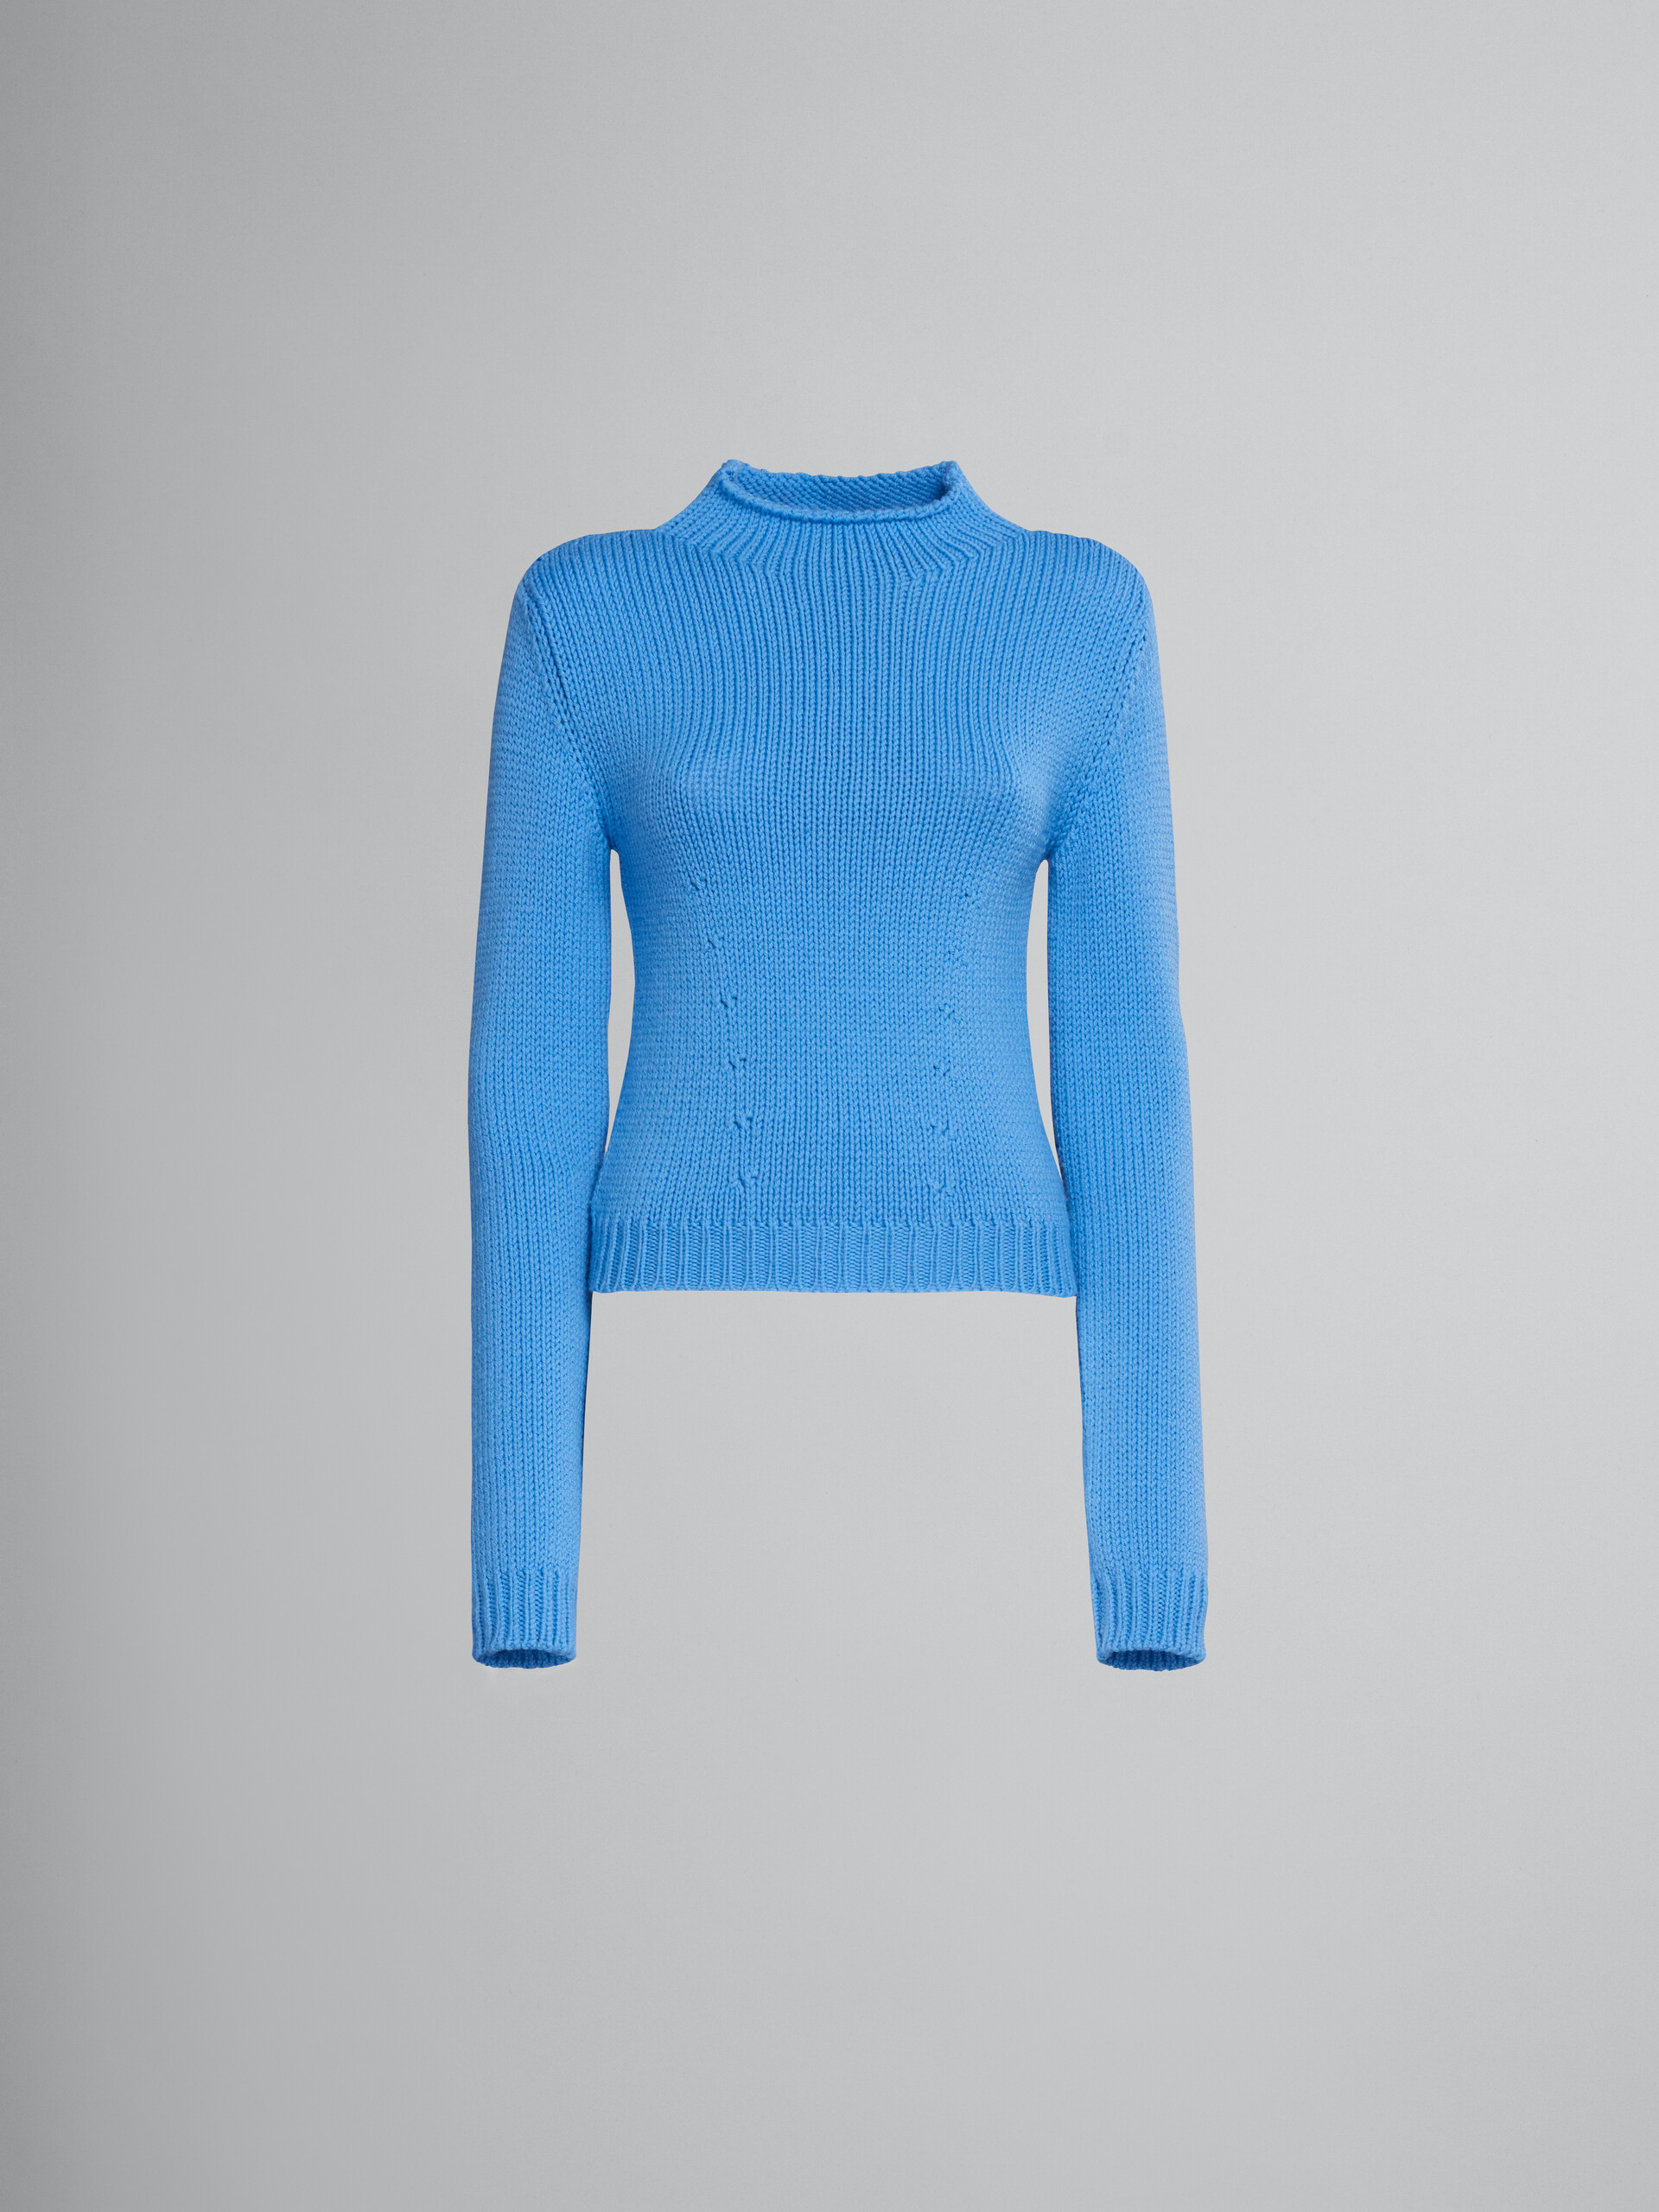 Light blue wool sweater with logo - Pullovers - Image 1